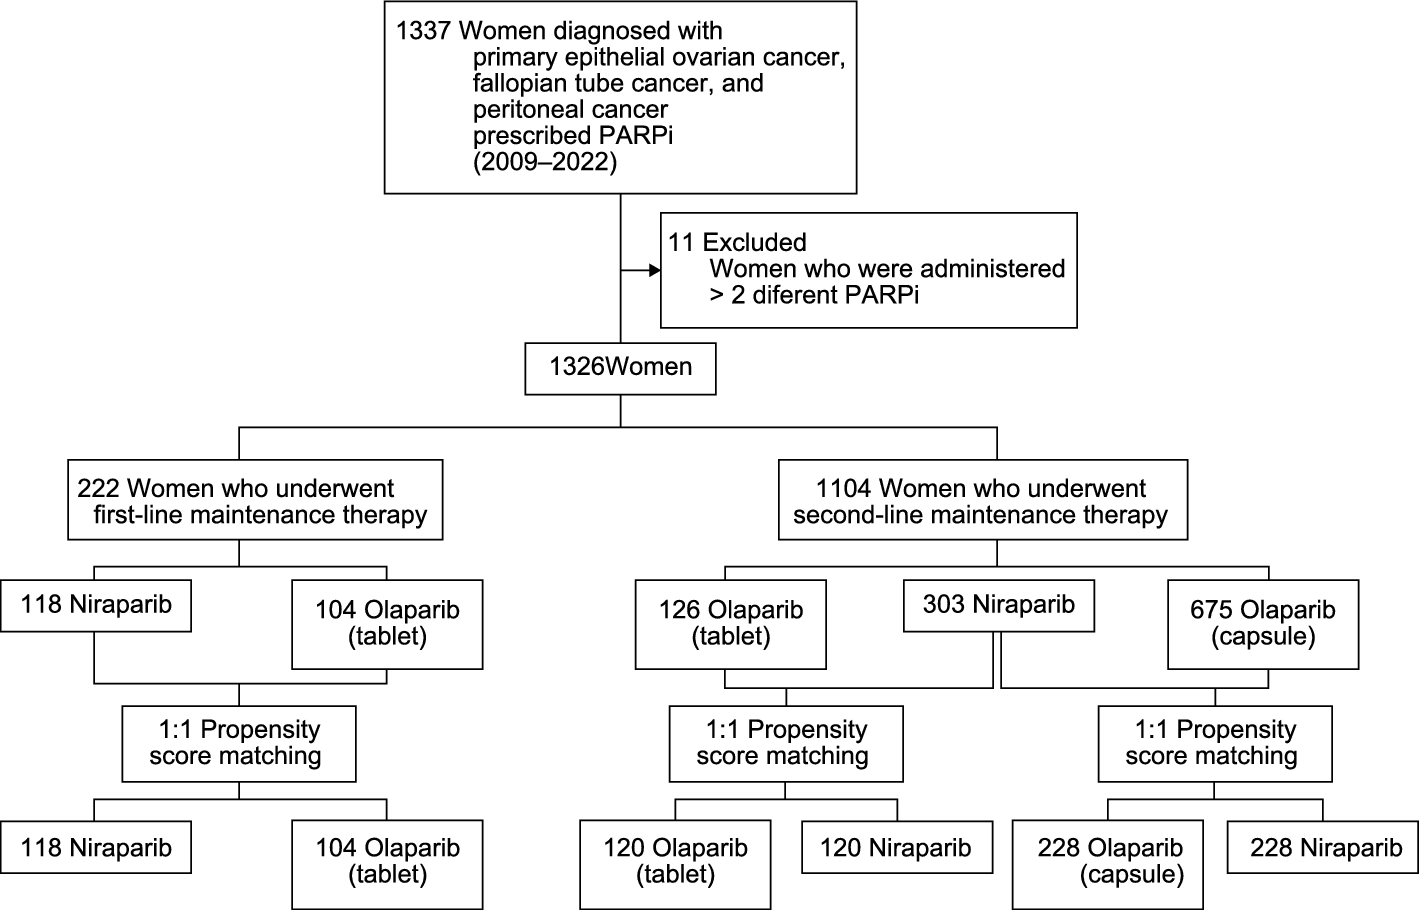 Comparison of Adverse Events Between PARP Inhibitors in Patients with Epithelial Ovarian Cancer: A Nationwide Propensity Score Matched Cohort Study